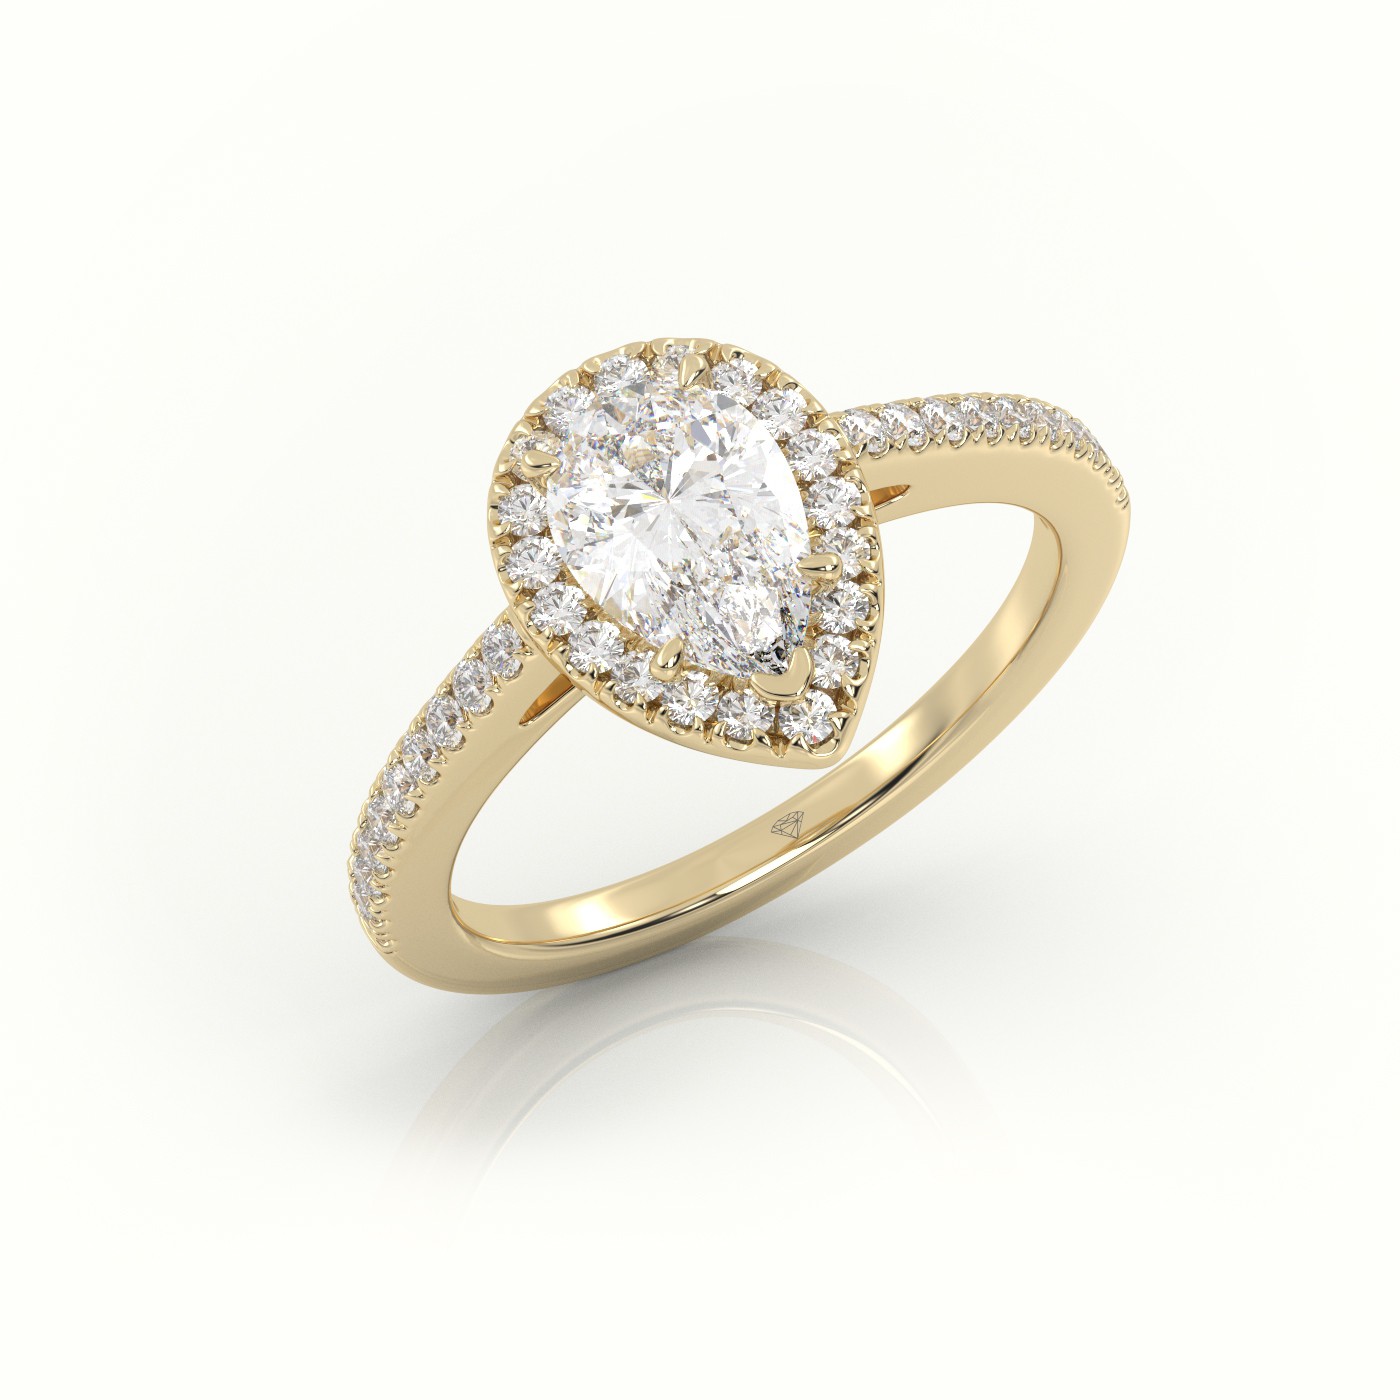 18K YELLOW GOLD PEAR CUT DIAMOND HALO PAVE SETTING ENGAGEMENT RING